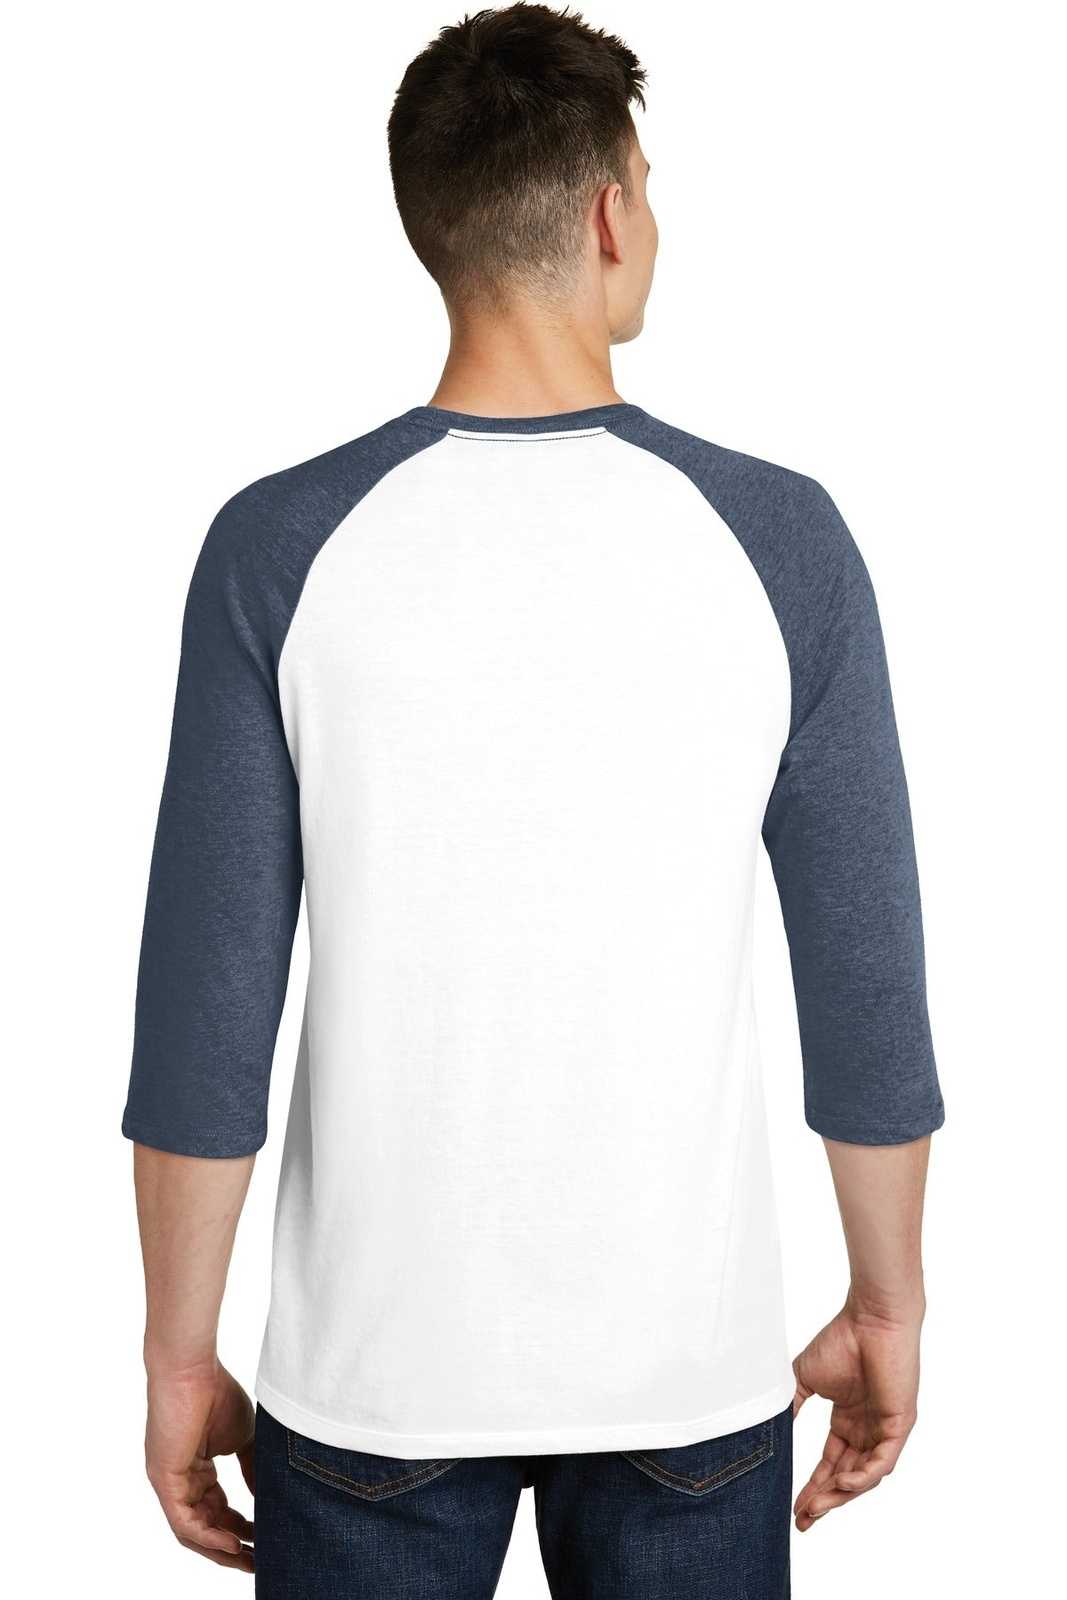 District DT6210 Very Important Tee 3/4-Sleeve Raglan - Heathered Navy White - HIT a Double - 1